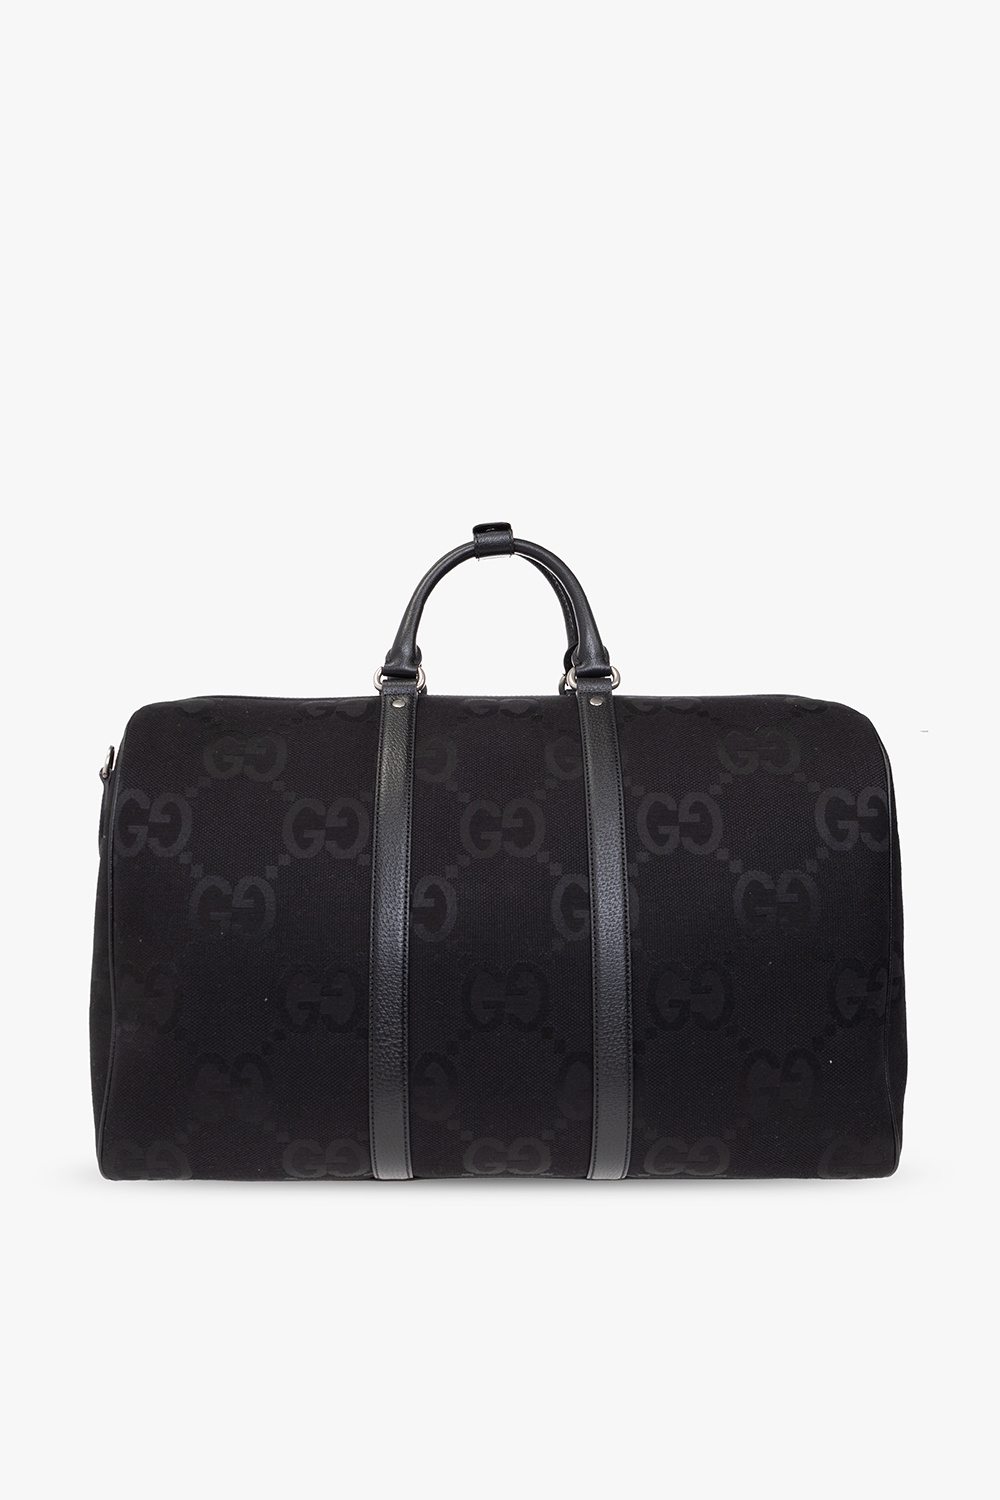 Gucci Double G Leather Duffle Bag - Black